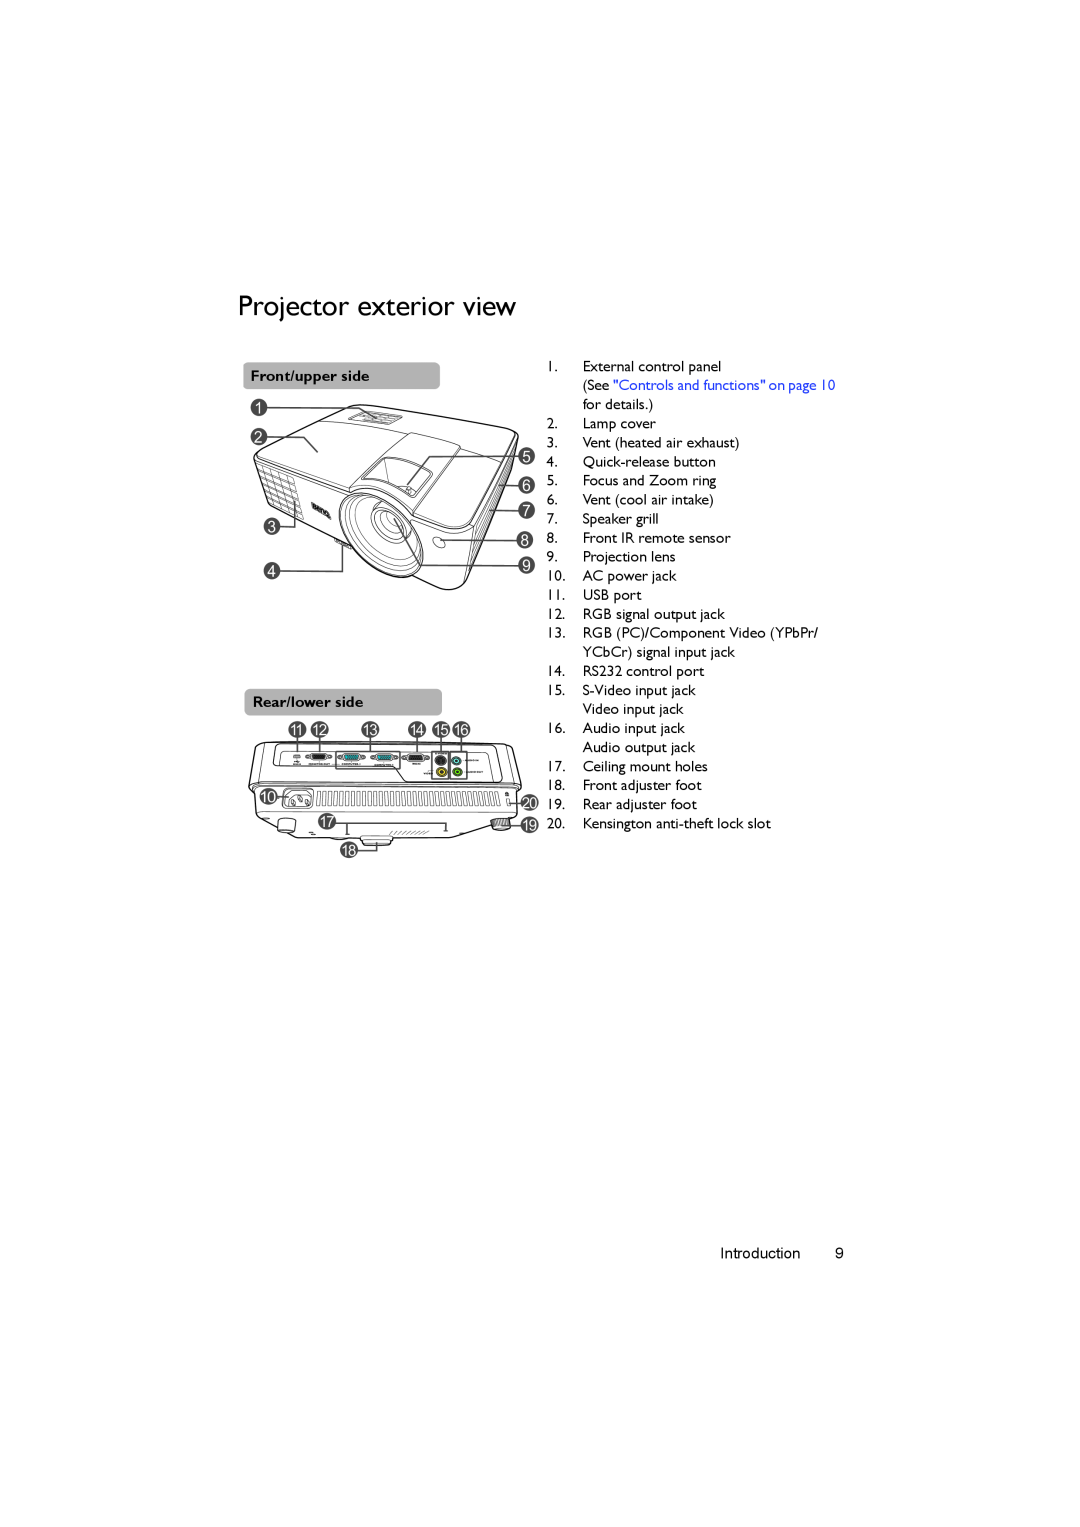 BenQ MX503 Projector exterior view, Front/upper side, Rear/lower side, See Controls and functions on page 10 for details 